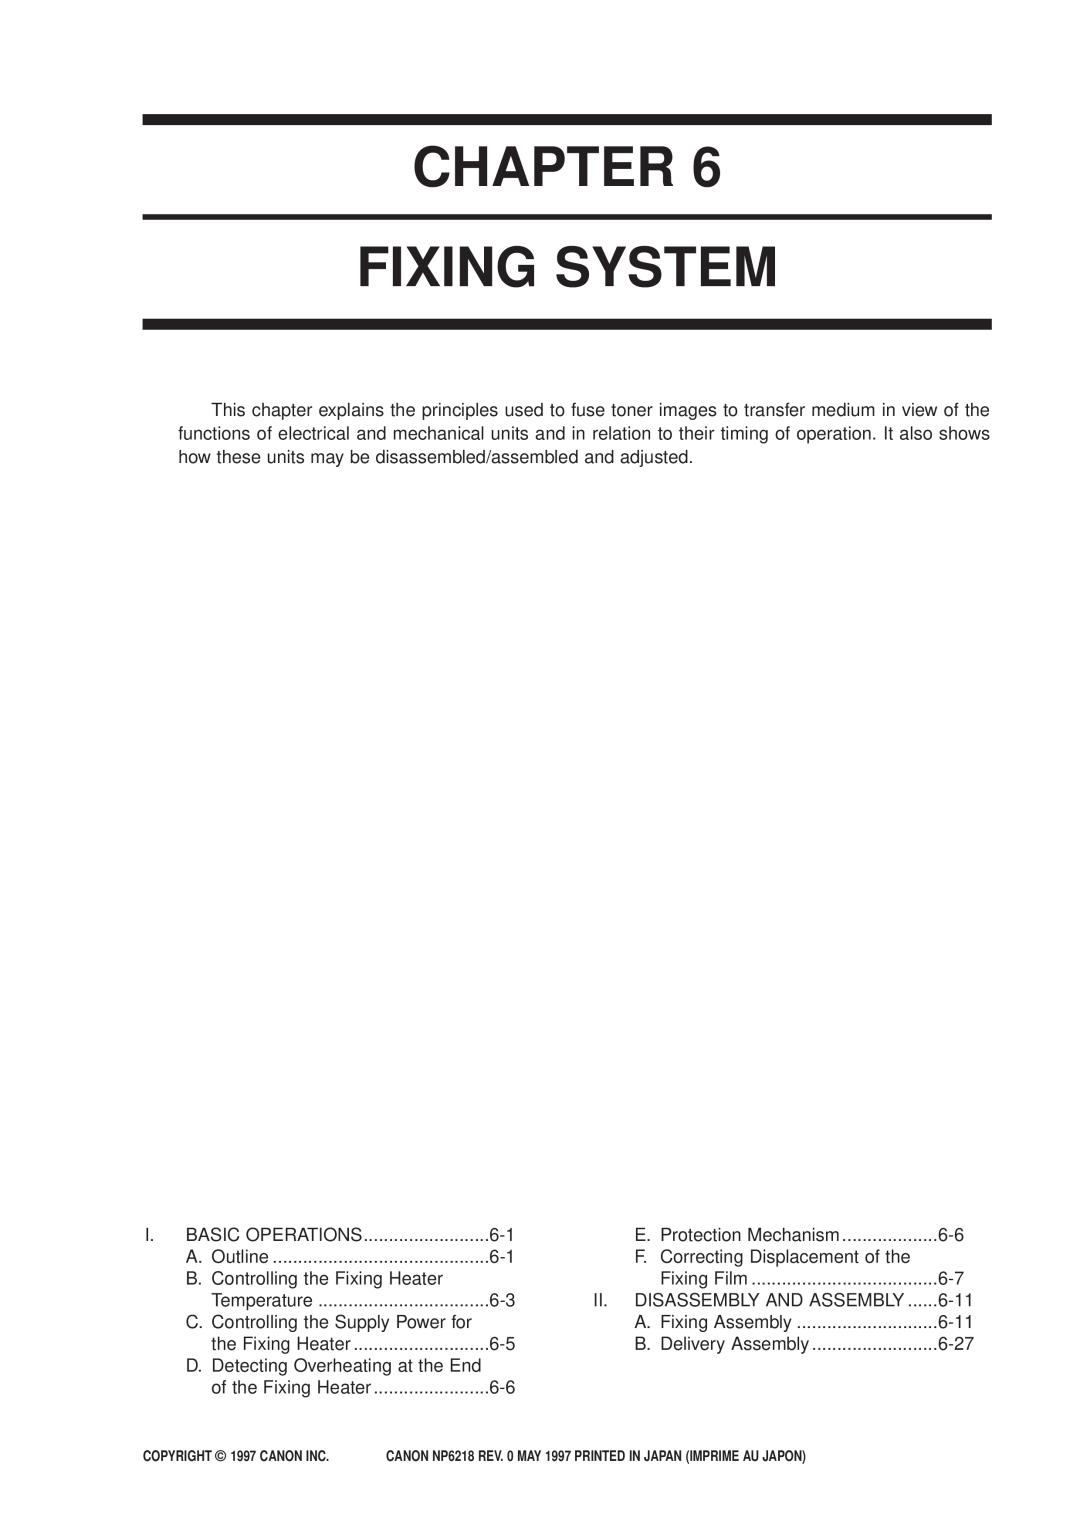 Canon NP6218, FY8-13EX-000 service manual Chapter Fixing System 